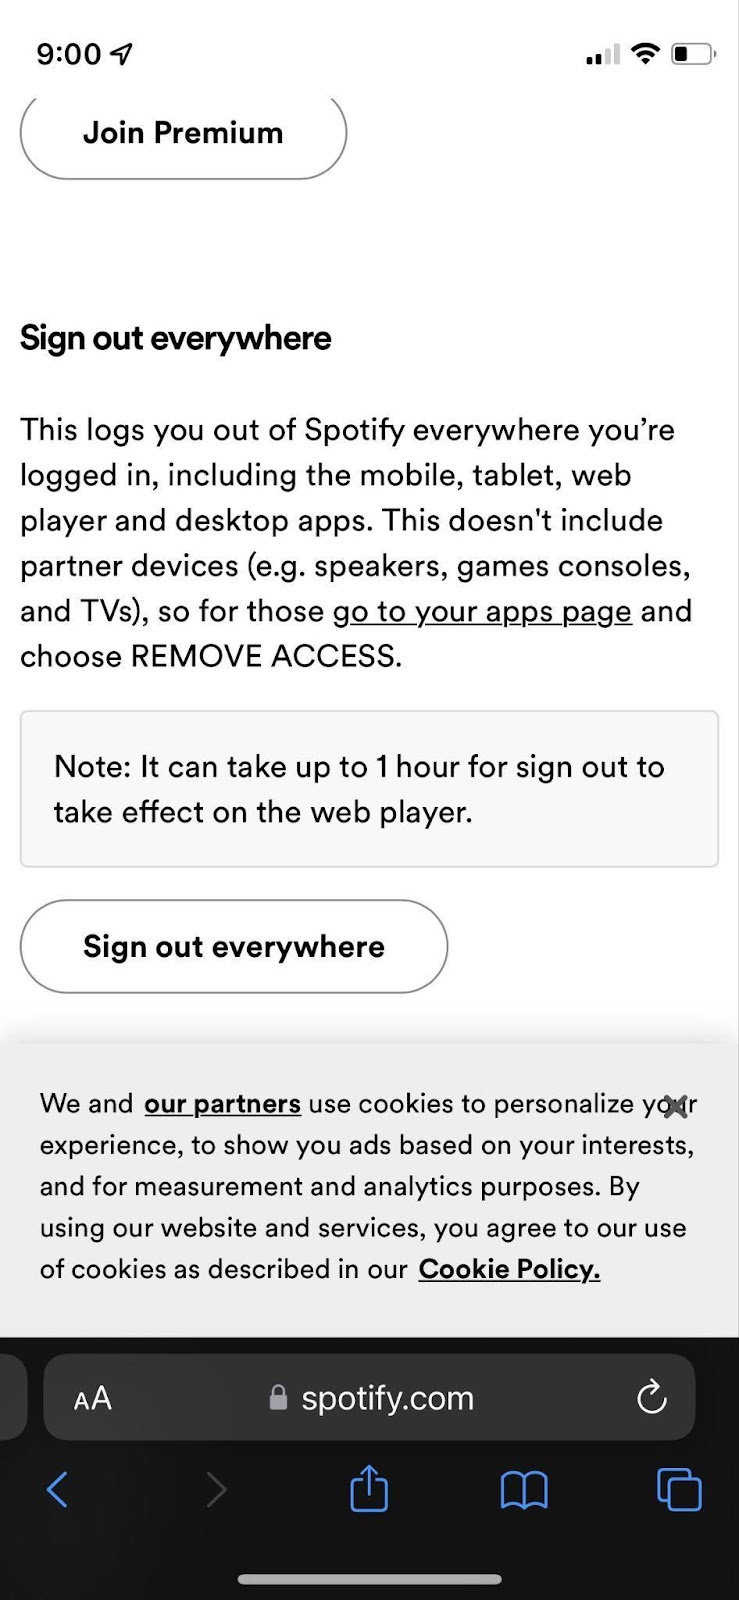 sign out everywhere option to fix Spotify no internet connection issue